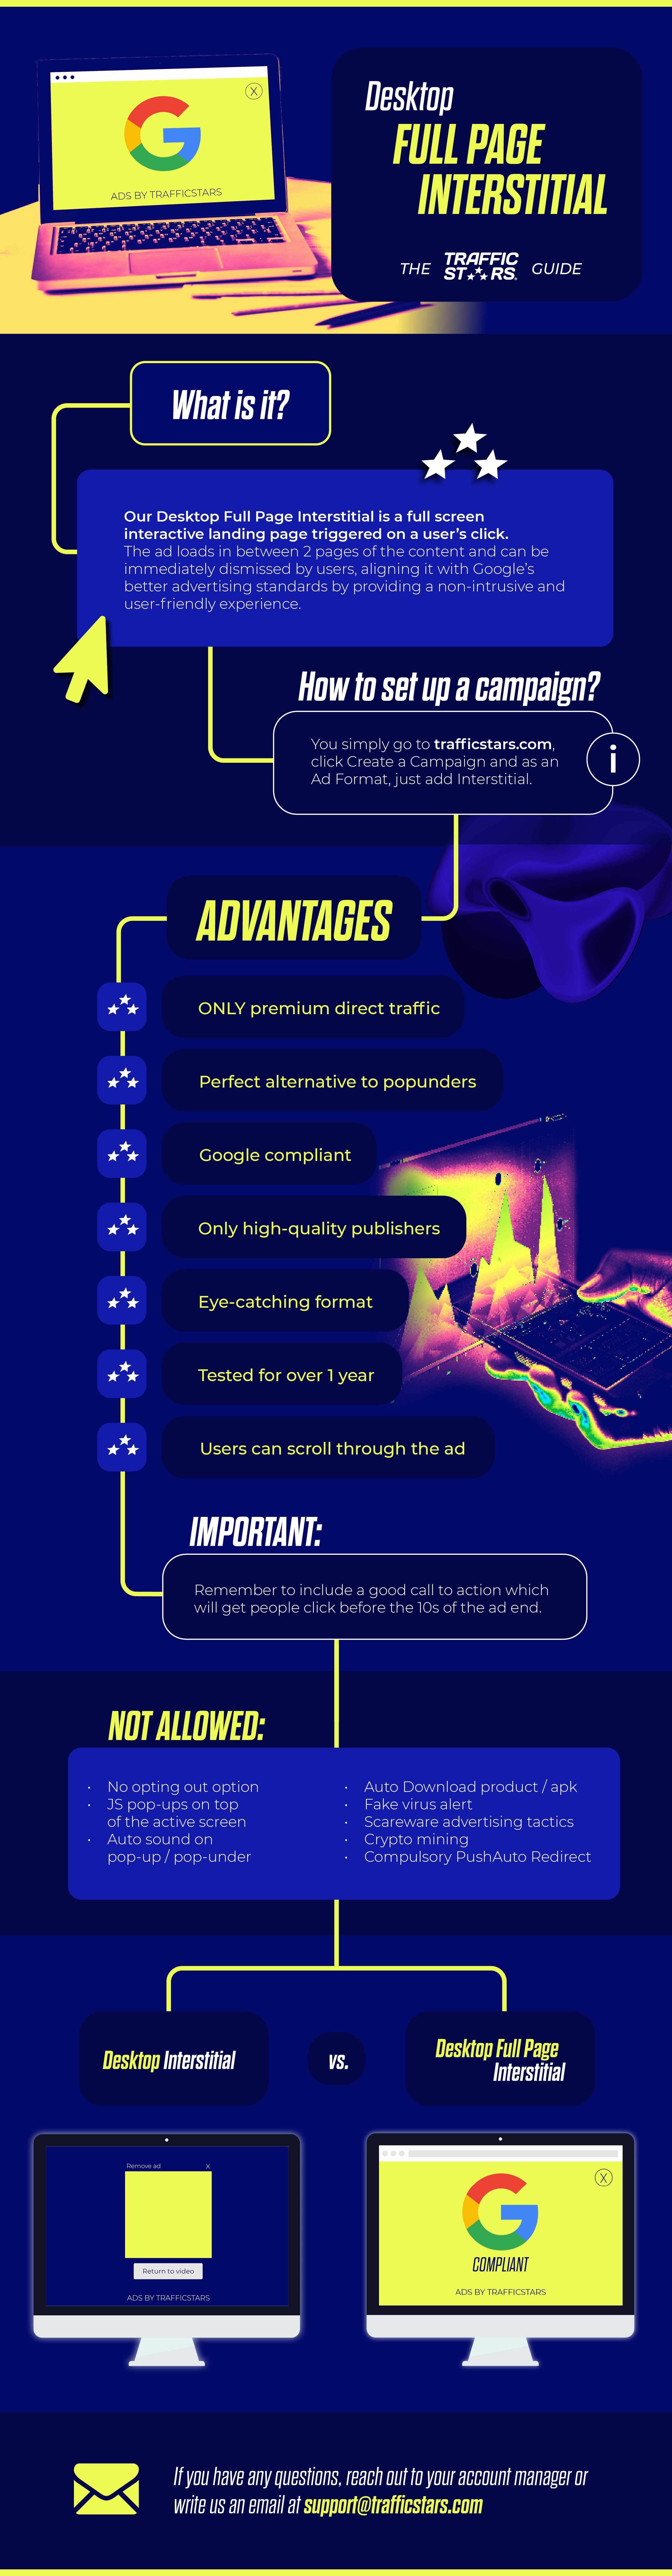 Full Page Desktop Interstitial infographic